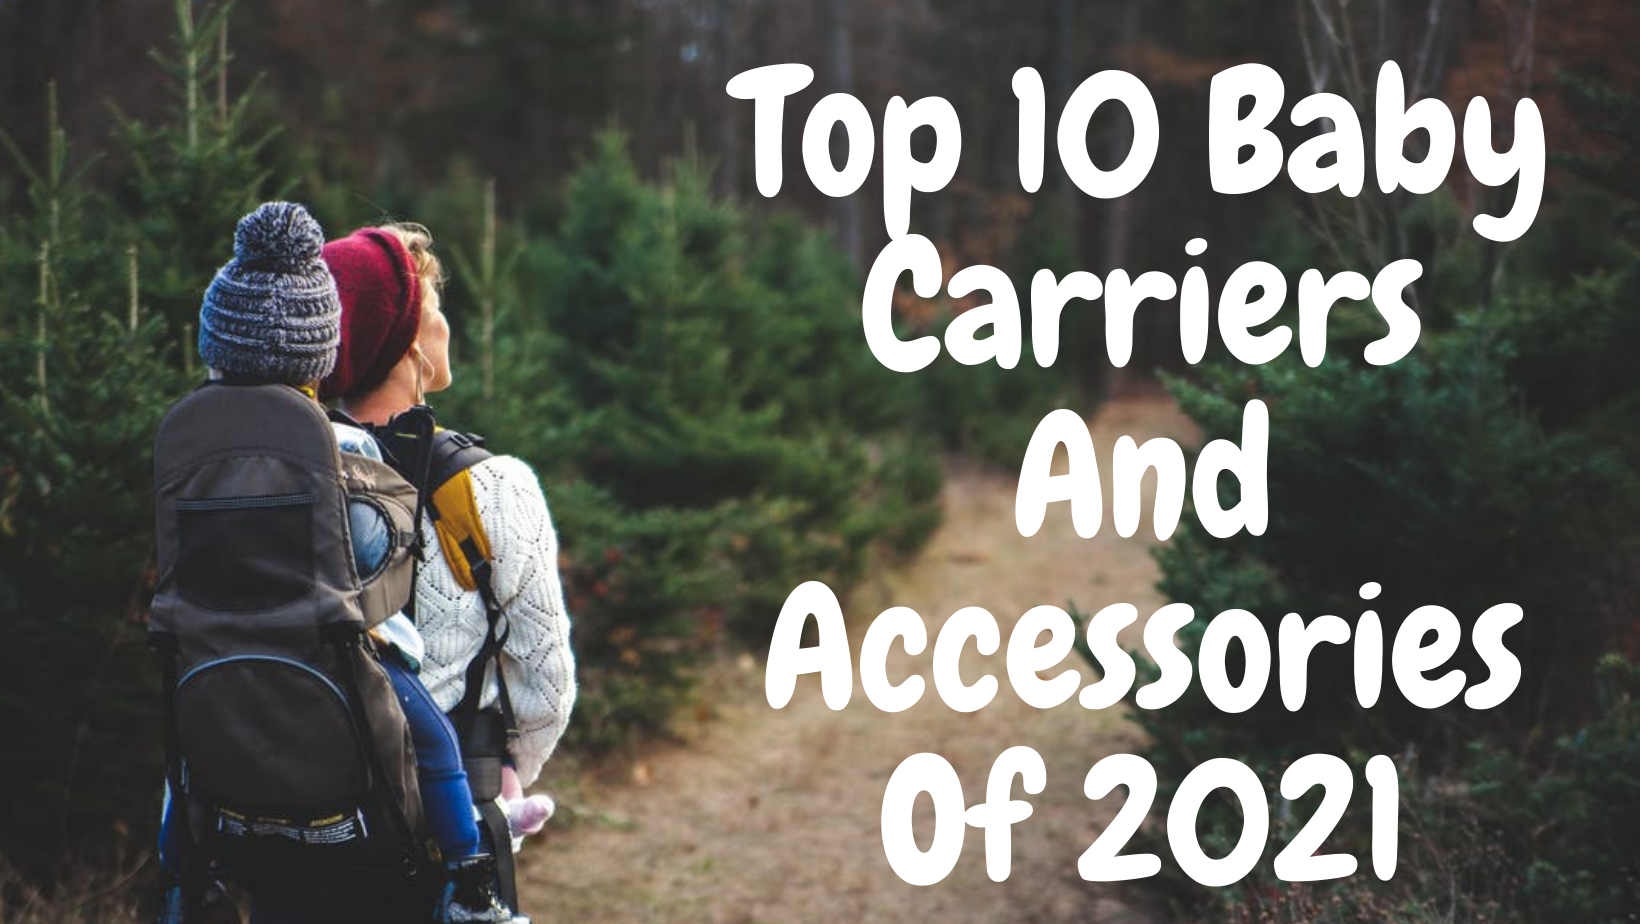 Top 10 Baby Carriers And Accessories Of 2021